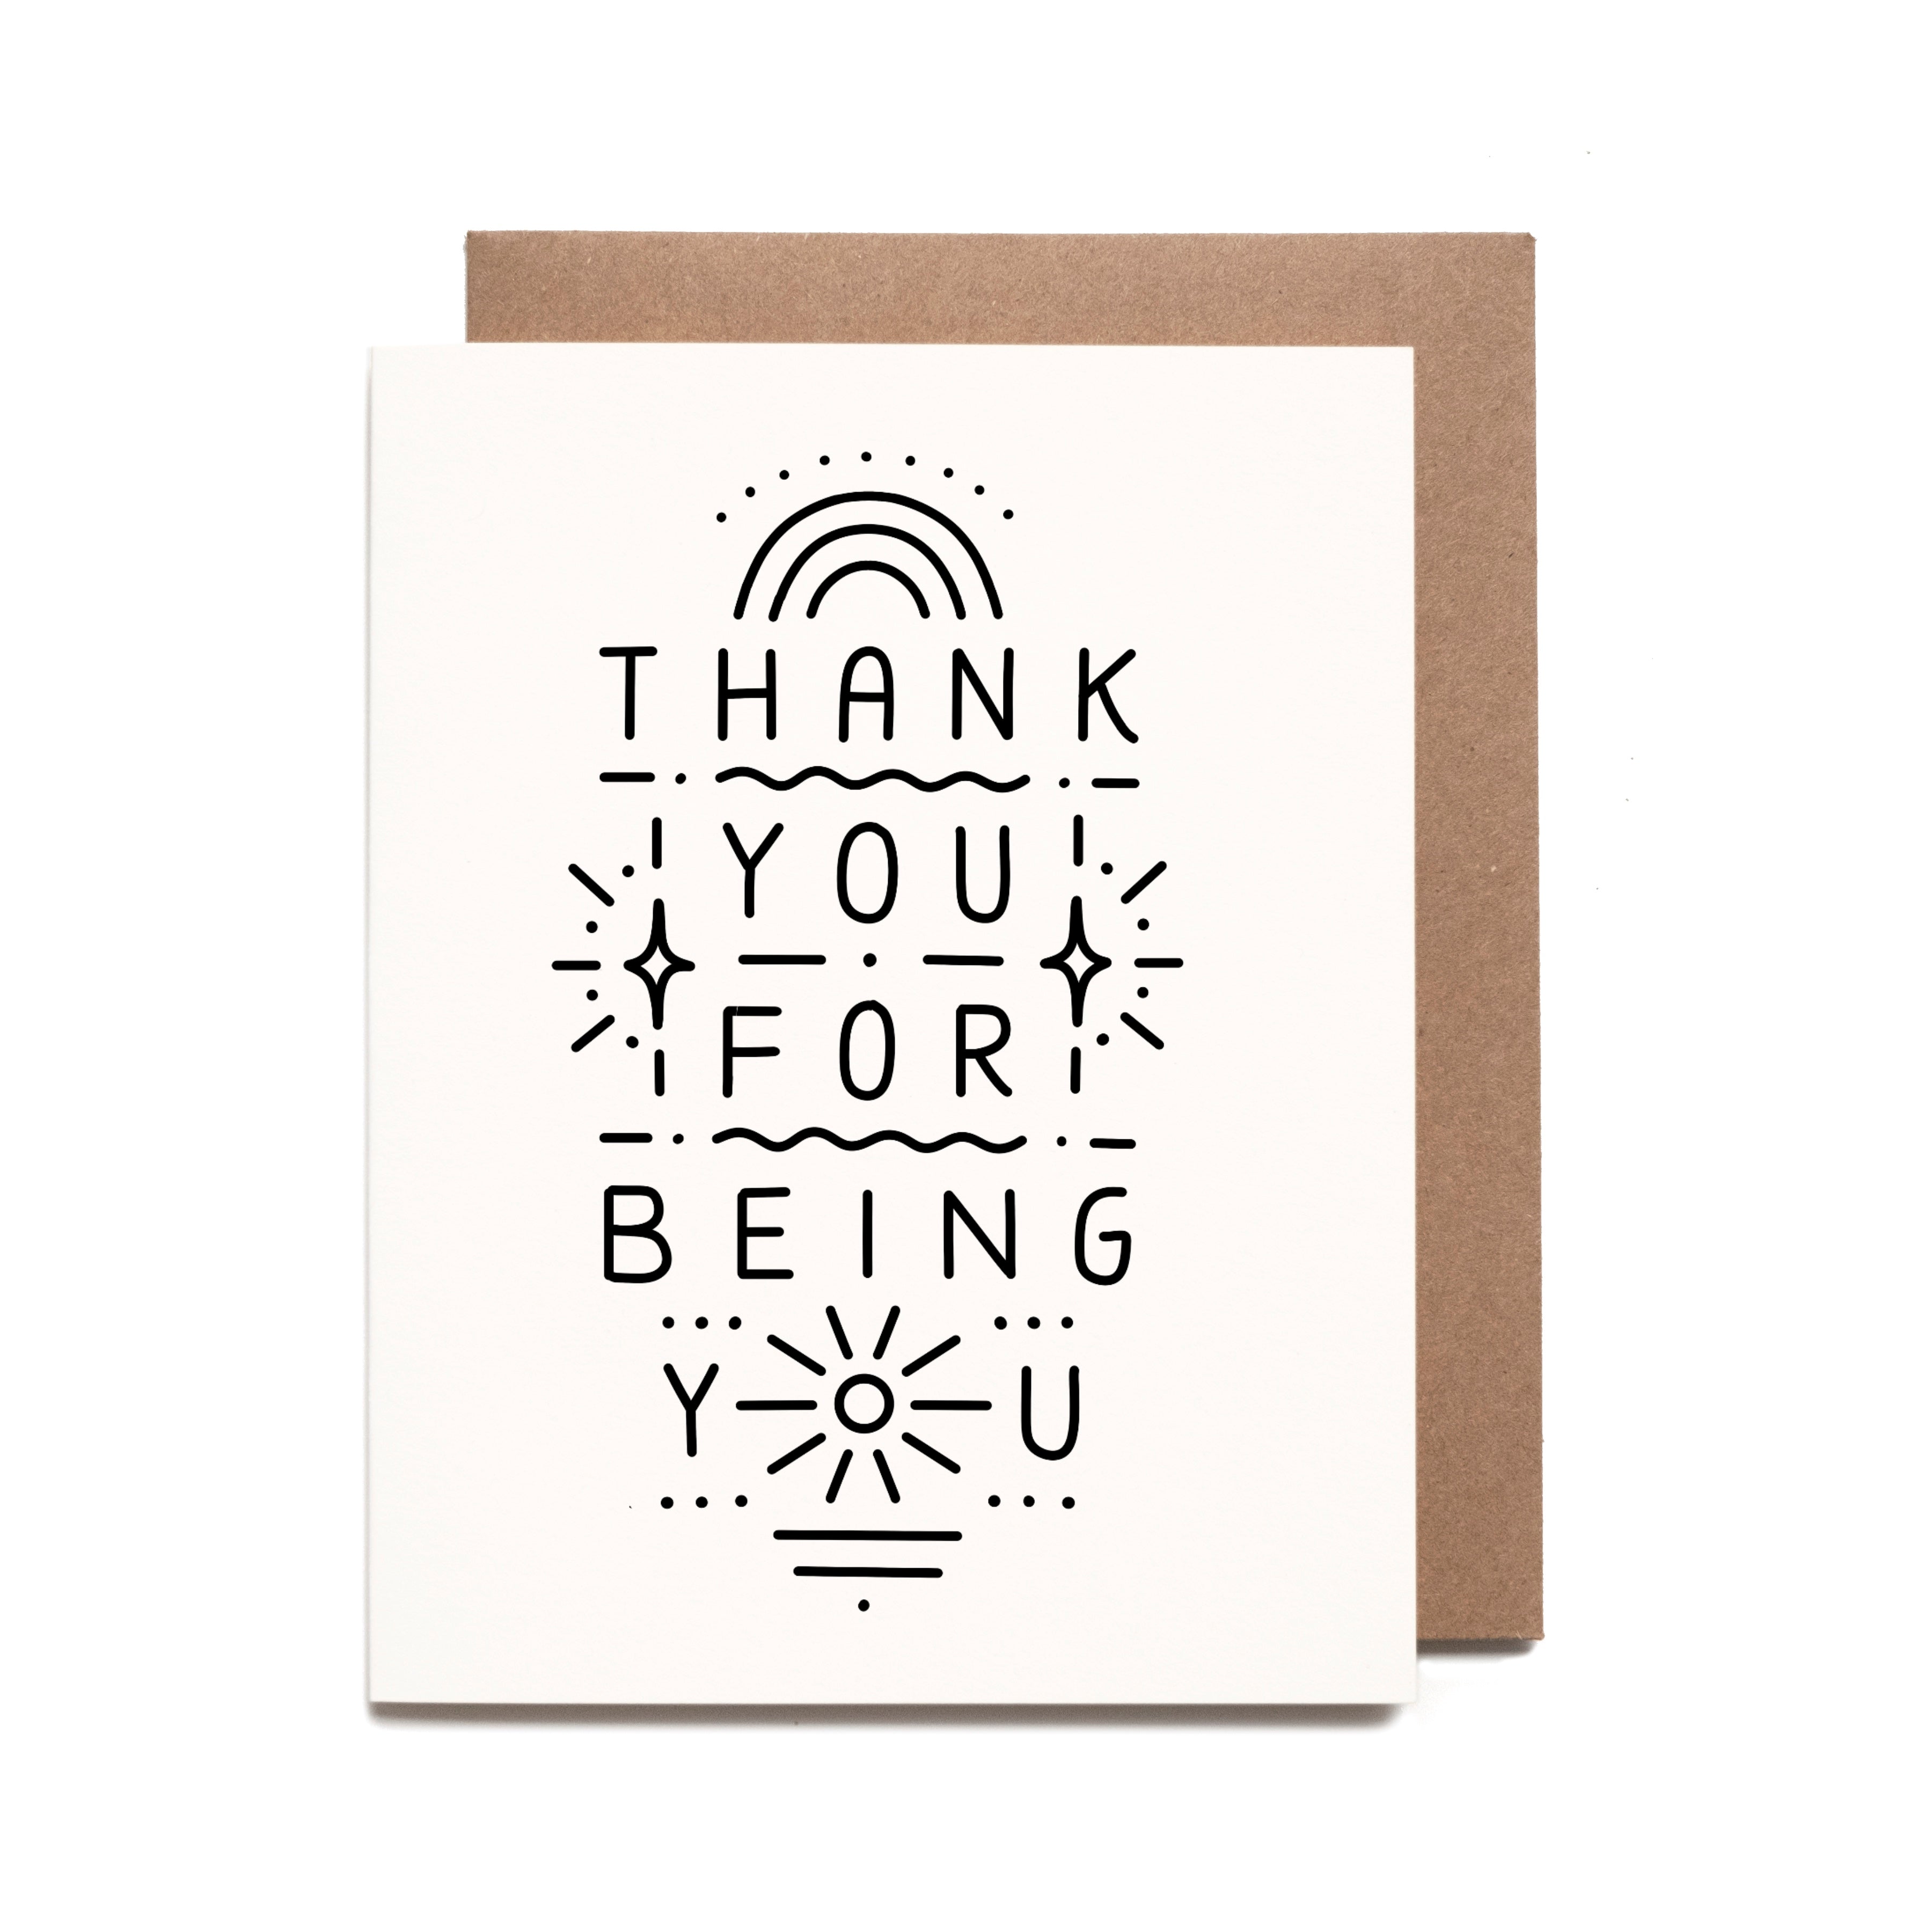 Blank Cards and Envelopes 5x7, 100 Set Blank Note Cards Thank You